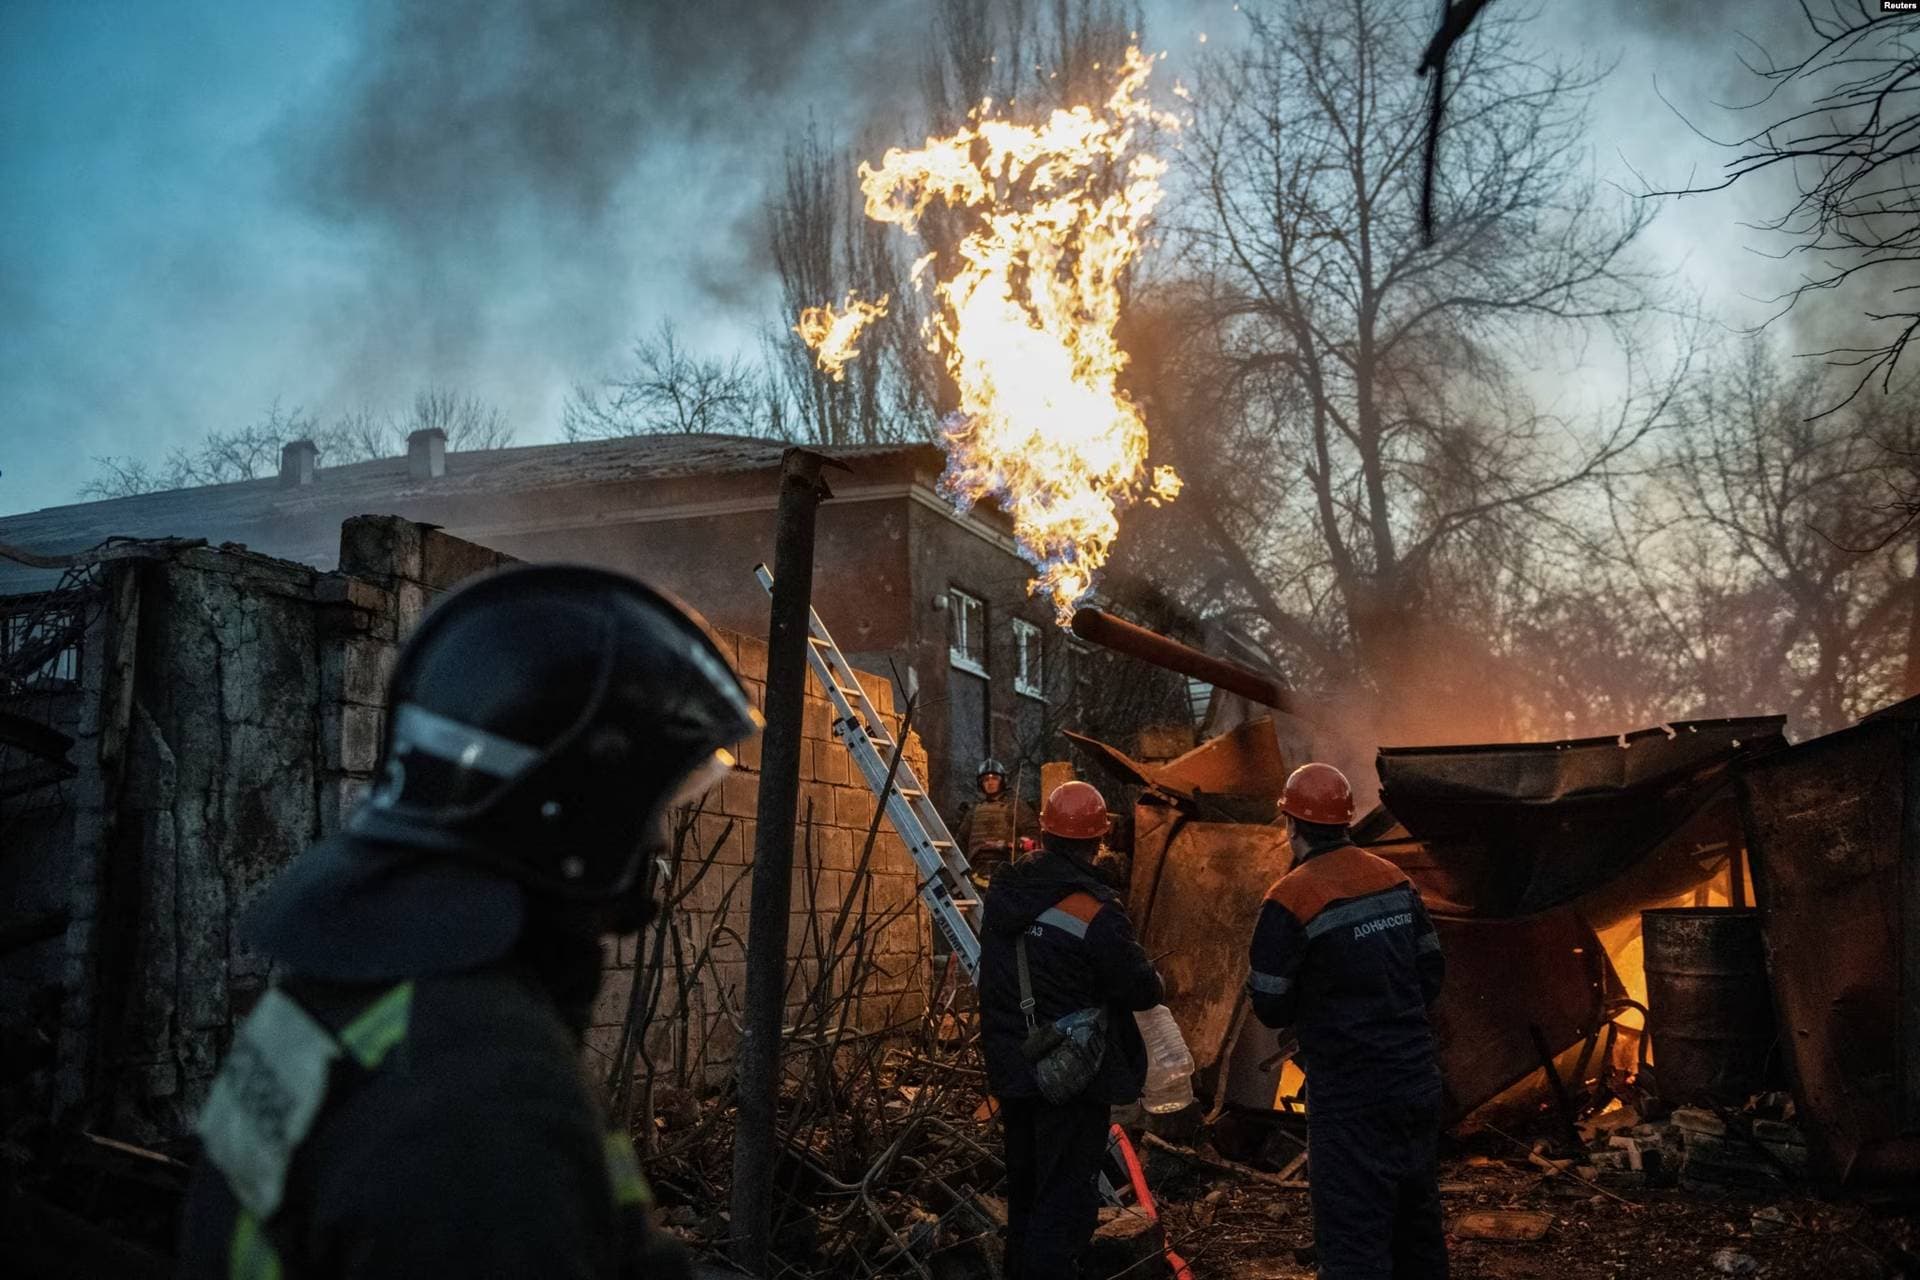 Rescuers work to put out a fire outside a damaged residential building in Donetsk